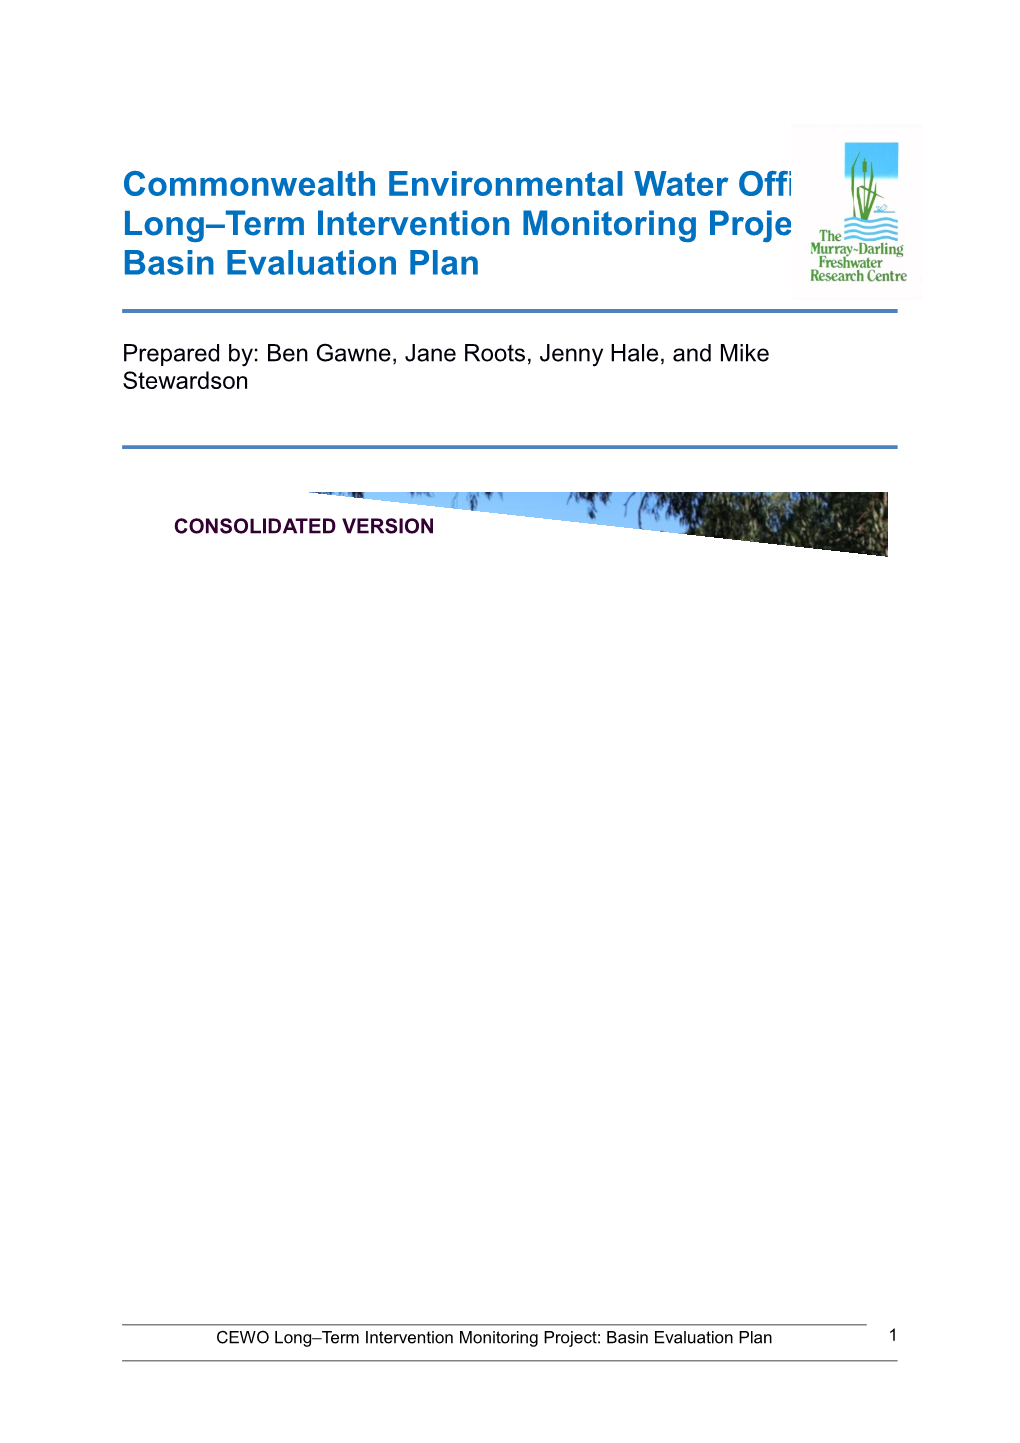 Commonwealth Environmental Water Office Long Term Intervention Monitoring Project: Basin